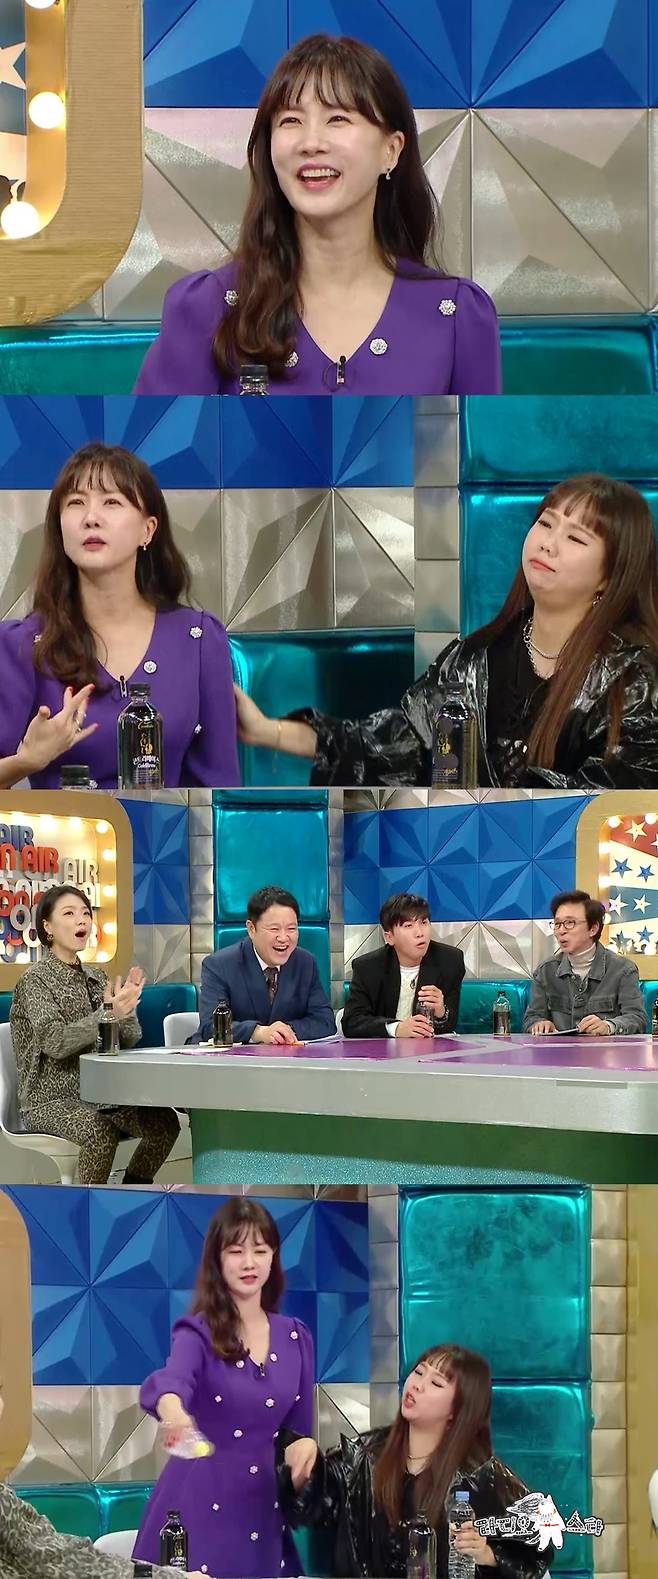 MBCs Radio Star (planned by Kang Young-sun/director Kang Sung-ah), which is scheduled to air on the 1st, will be Bertimyeon Flying with Park So-hyun, Hong Hyon-hee, no:ze, Anupam!It is decorated with special features.Park So-hyun is a frozen human in the entertainment industry.It is because it celebrates its 20th anniversary as a DJ of Park So-hyuns Love Game and has been playing a role for 23 years, such as keeping the joint MC position for this is the moment capture world.In addition, Park So-hyun is also attracting attention as a beauty during the unchanged preservative.Park So-hyun is a DJ of Radio Star, which he found in four years, and he is a DJ of the radio Park So-hyuns Love Game. He is a longevity secret that he was able to celebrate his 20th anniversary.Park So-hyun said, I was surprised by the misunderstanding that I recently marriage. He said that he was actively explaining the marriage surrounding him in Radio Star.Also, Park So-hyun boasts a long-breathed Hong Hyon-hee and full-size chemistry on the radio.In particular, Park So-hyun recalled the time when Hong Hyon-hee was marriage, I was tearful while reading the story of Hong Hyon-hee marriage celebration and broadcast accident grade (?)I will tell you the episode and steal my eyes.Another representative longevity program of Park So-hyun is This is the moment of capture.Park So-hyun, along with Lim Sung-hoon, has been a co-MC for 23 years and has been on the Guinness record.In particular, he said, I have not missed a single time in 23 years.Park So-hyun also reveals the secrets of the pack during the entertainment industry. Park So-hyun says, I have been keeping my weight for 30 years.In addition, it makes you wonder about the contents of the film because it made the film into a water sea to disclose the secret of life-friendly skin care.In addition, Park So-hyun, who also played a role as a video star MC for Radio Star, reveals his regret for Bis, which has recently ended, and tells the difference between Bis and Radio Star.